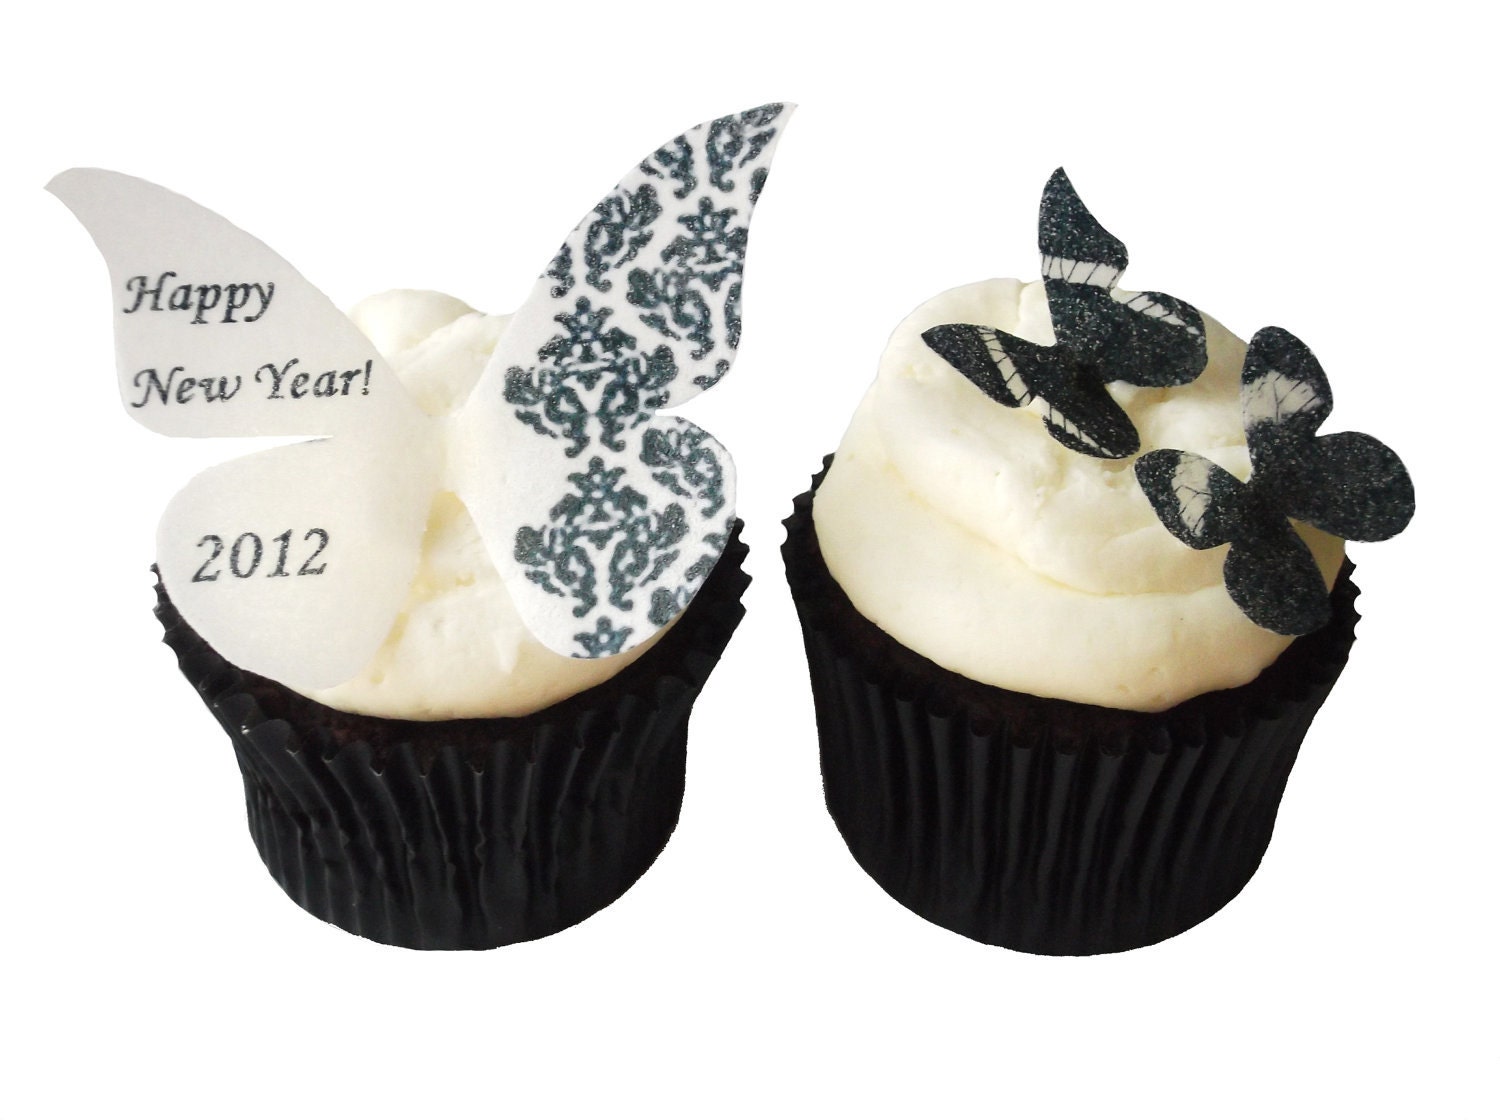 36 Edible Butterflies - Damask Cupcakes - NEW YEARS EVE 2012  Black and White Cake Decorations